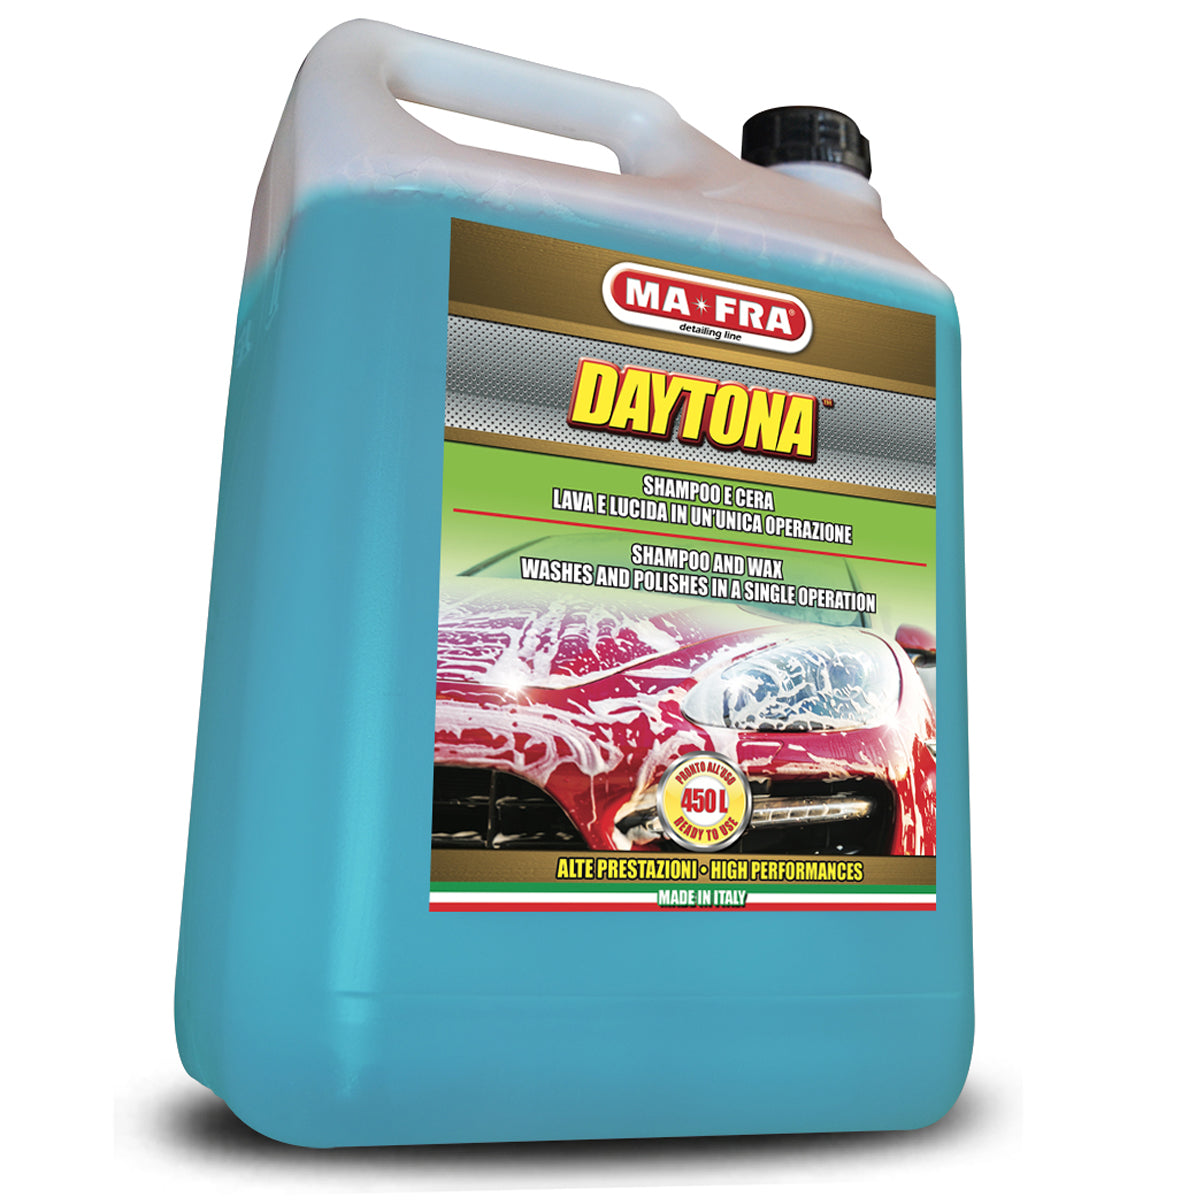 MaFra Daytona - Wash & Wax Conditioner Shampoo 4.5L. MaFra Daytona effortlessly combines washing and waxing into one simple step, enveloping your vehicle in a protective layer suitable for all bodywork types.